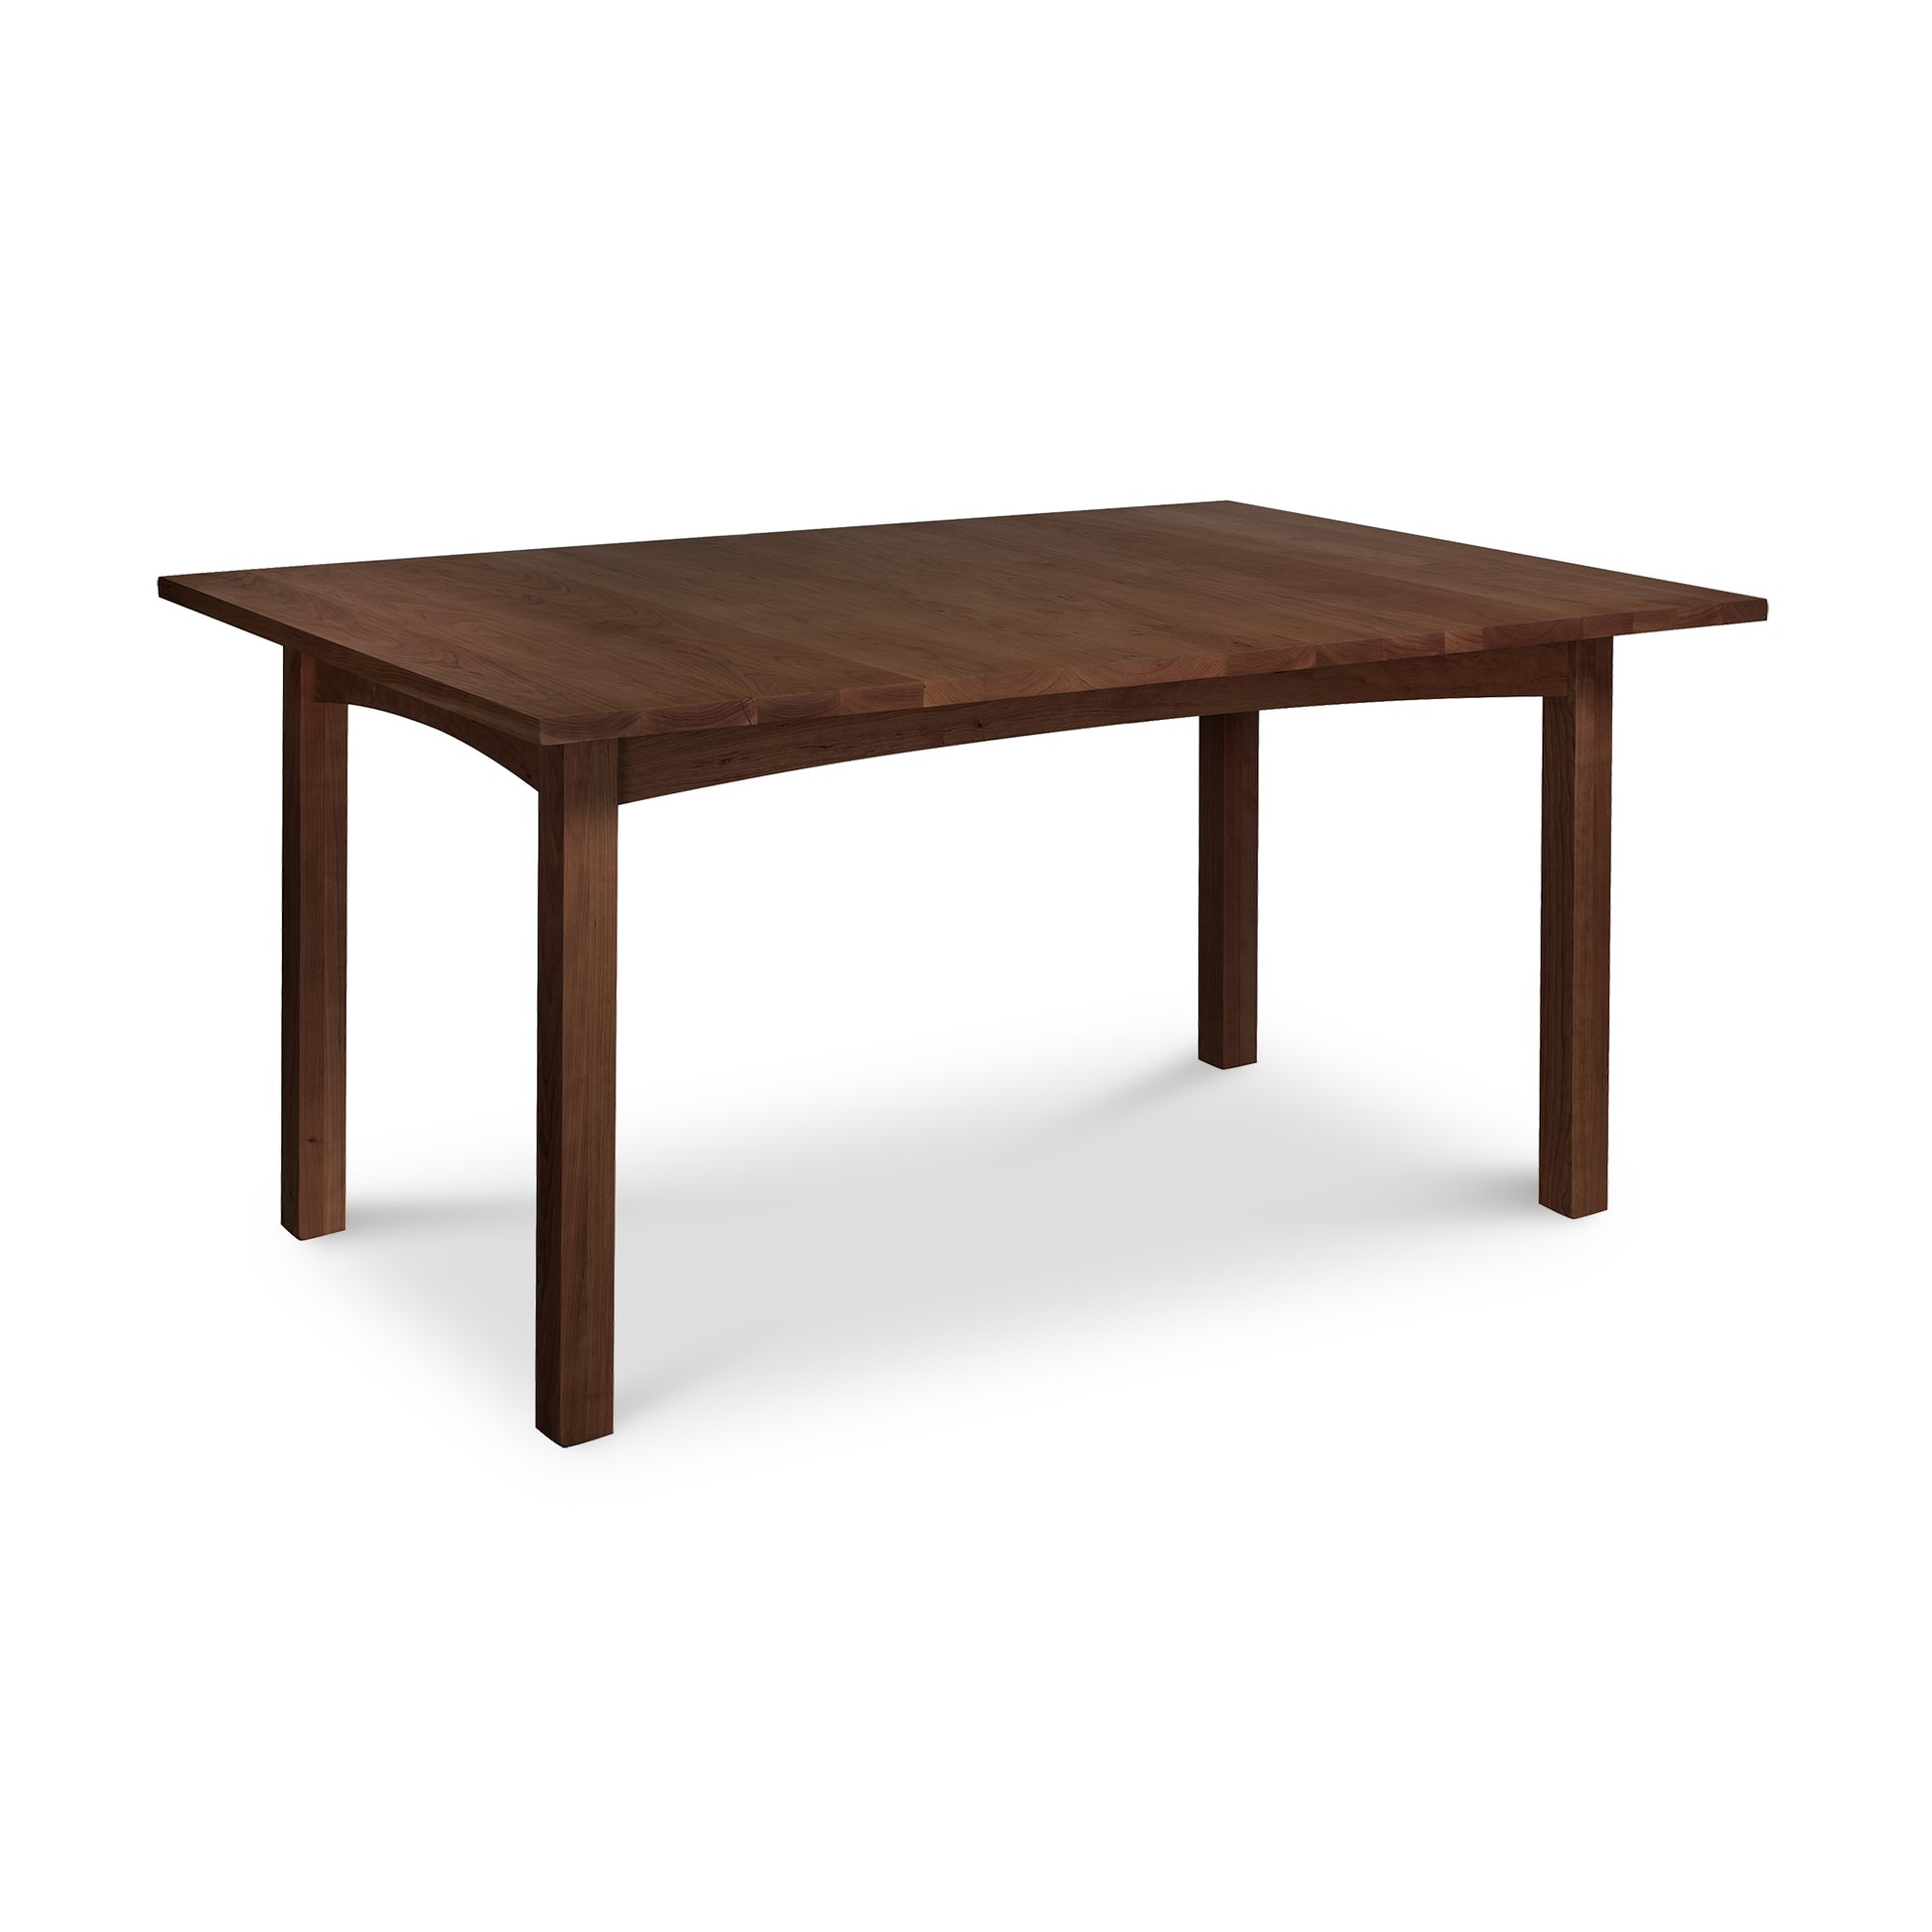 A rectangular Burlington Shaker Solid Top Dining Table with four legs, isolated on a white background, from Vermont Furniture Designs.